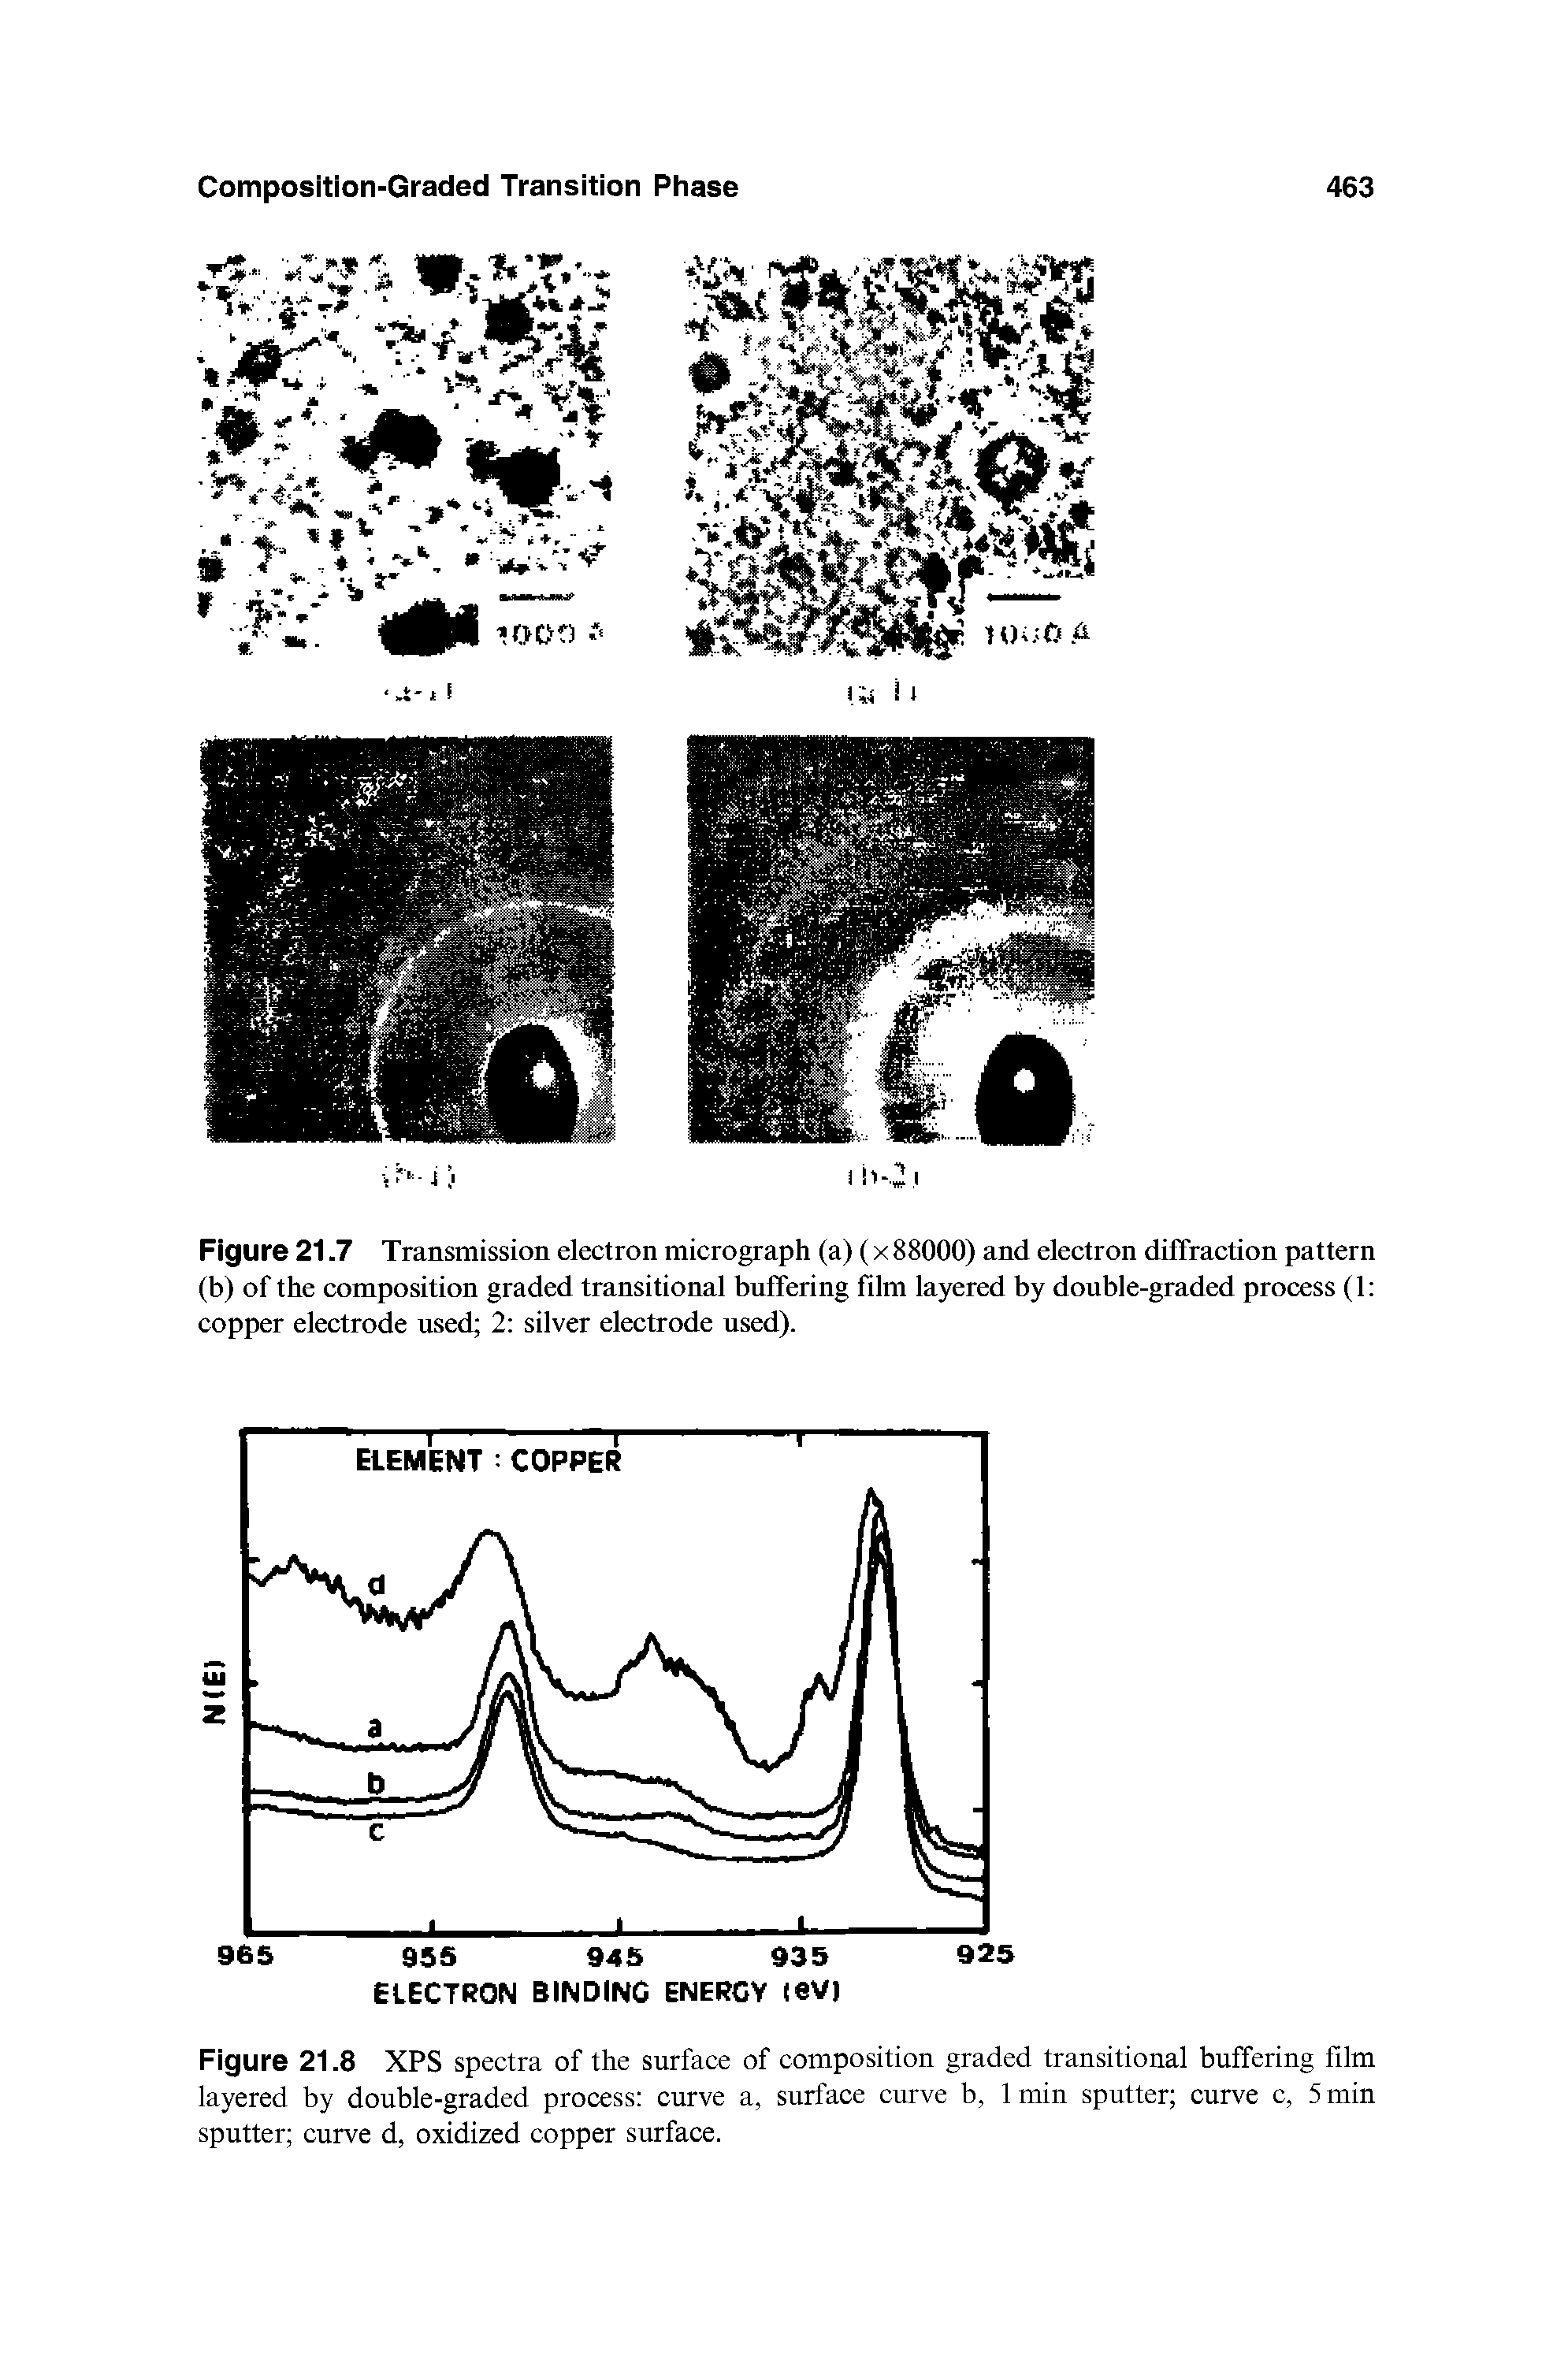 Figure 21.7 Transmission electron micrograph (a) (x 88000) and electron diffraction pattern (b) of the composition graded transitional buffering fdm layered by double-graded process (1 copper electrode used 2 silver electrode used).